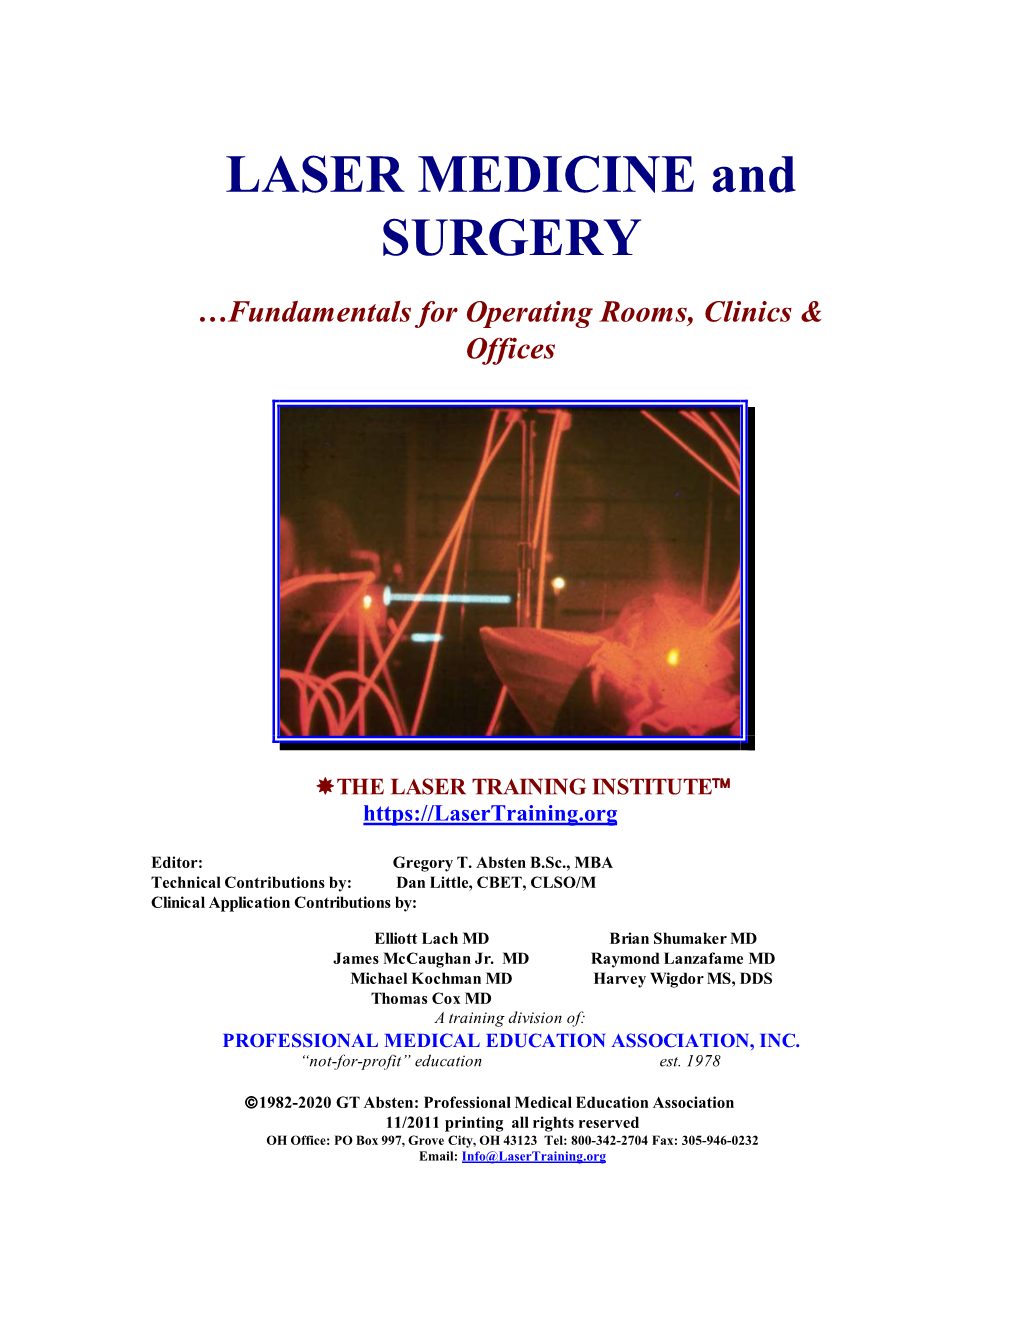 LASER MEDICINE and SURGERY